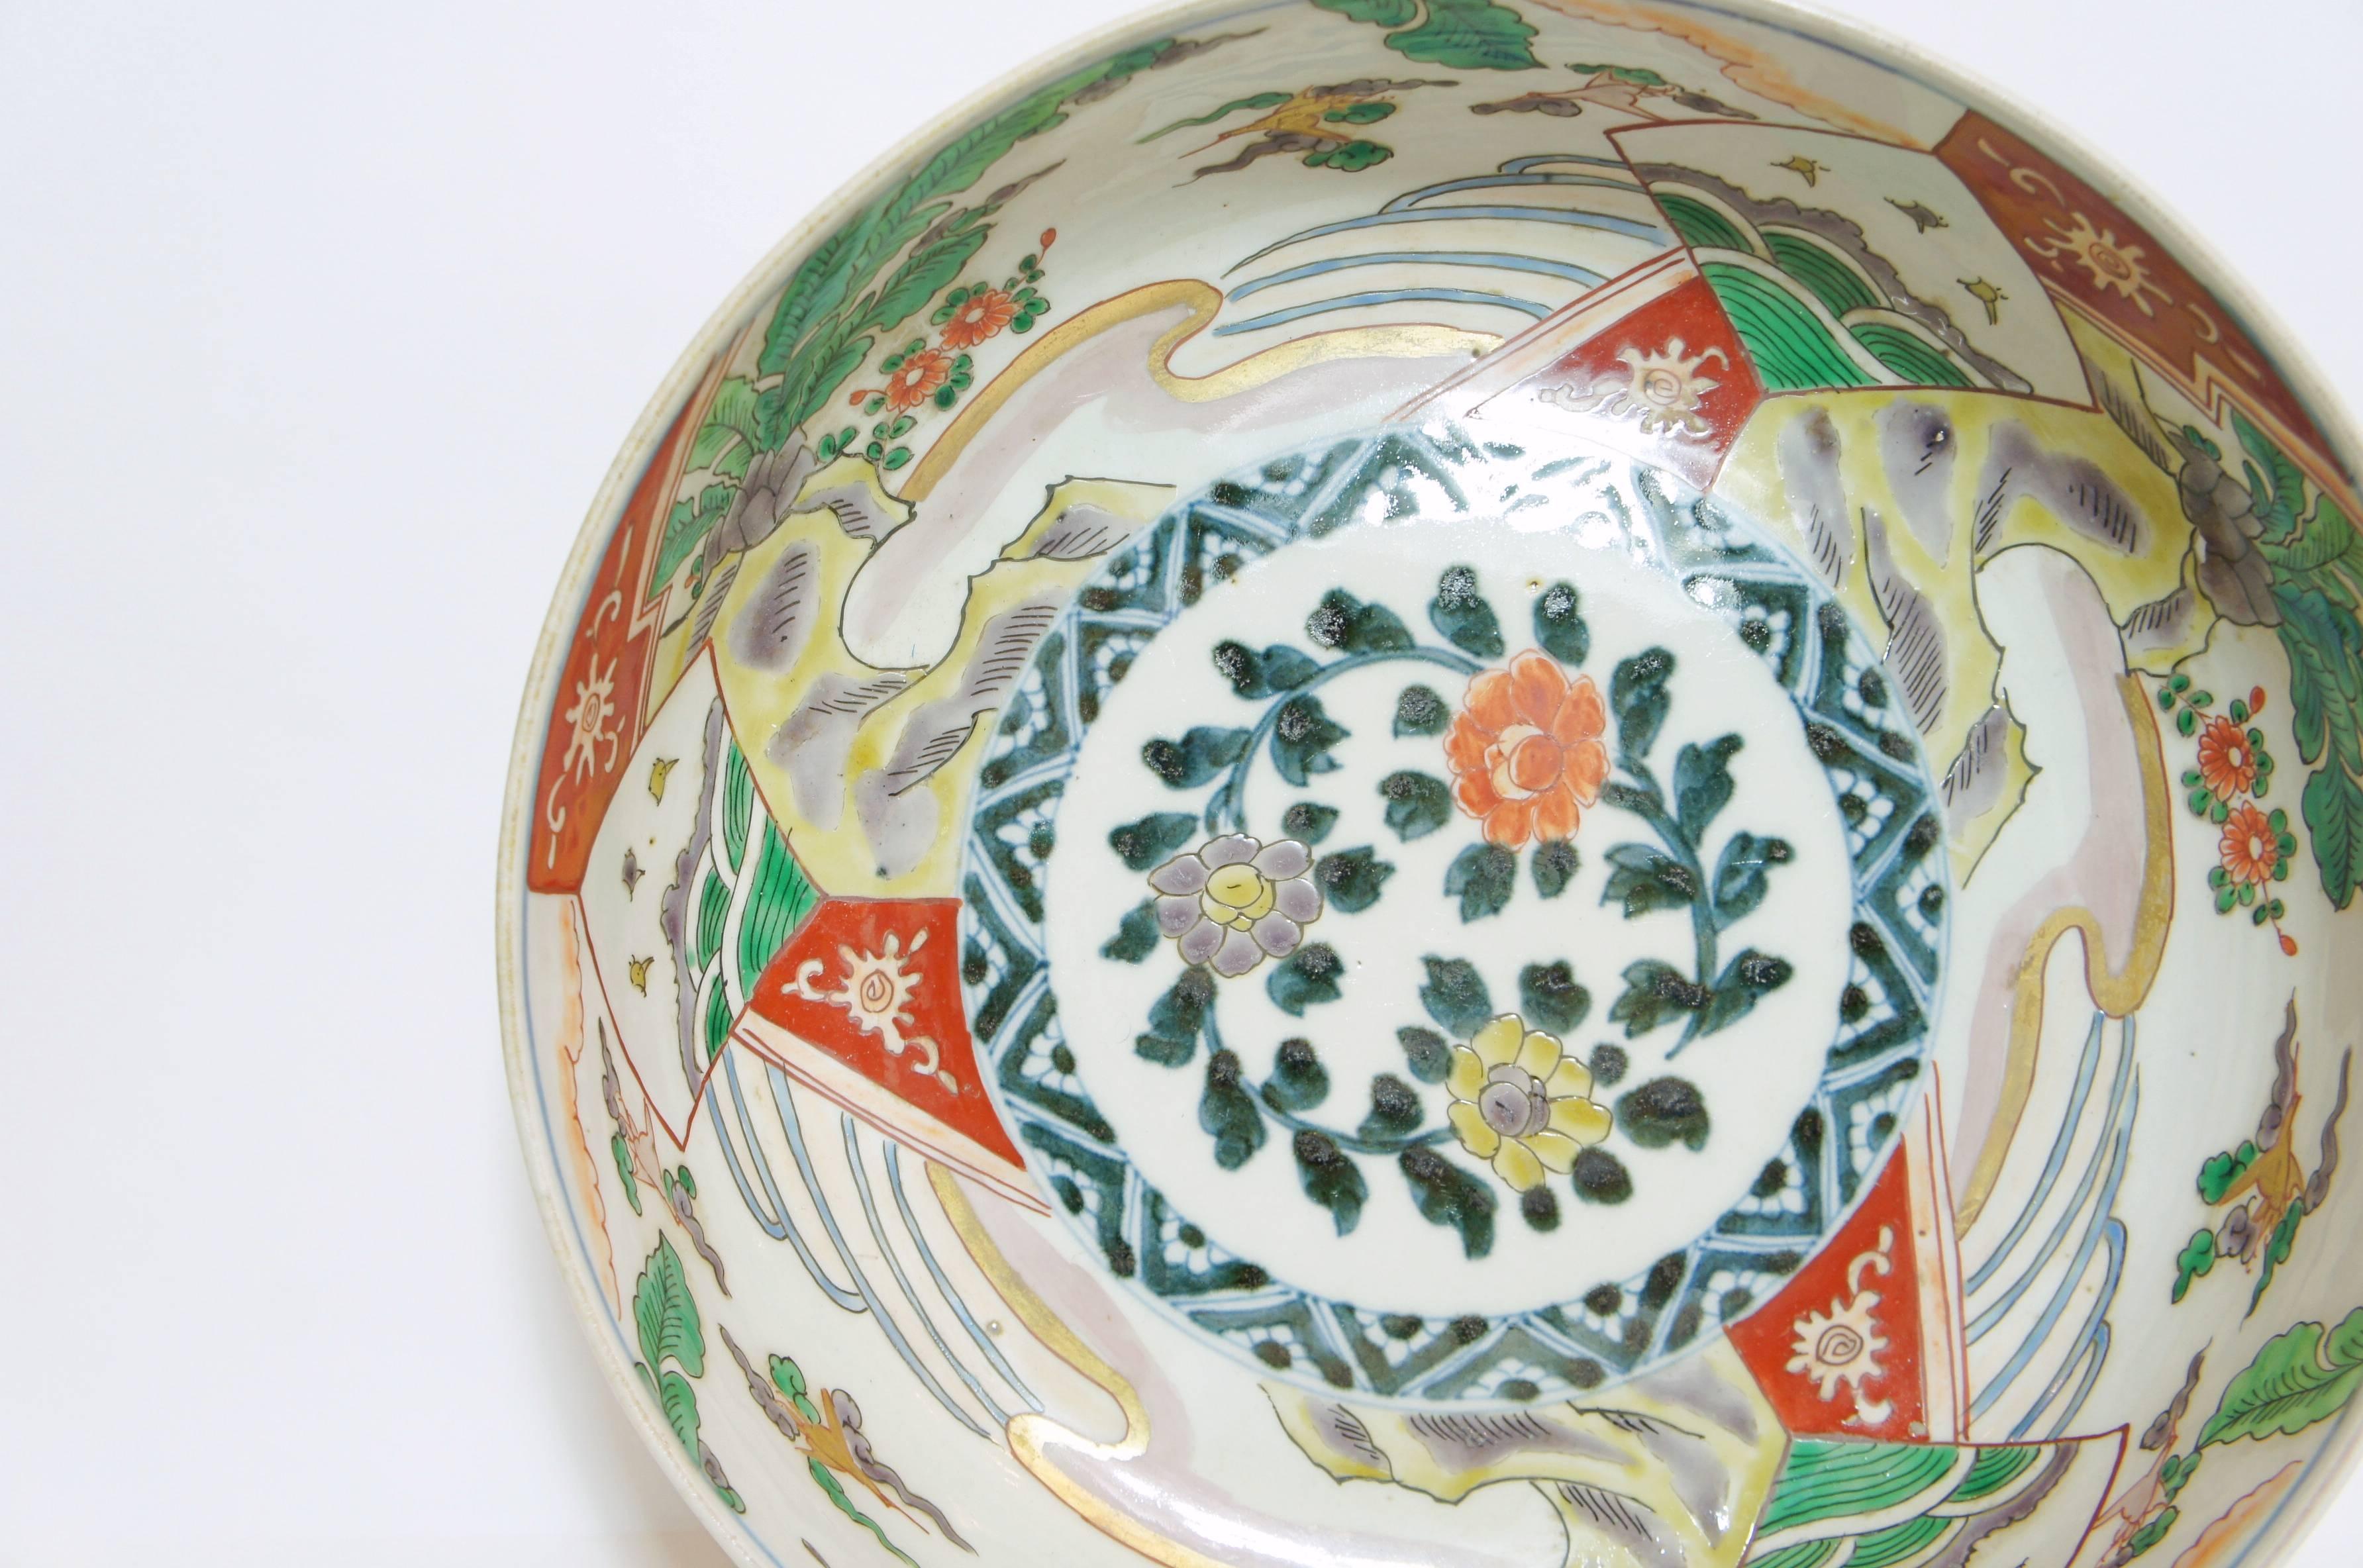 Hand-Crafted Japanese Colorful Landscape and Floral Motif on Ceramic Koimari Ware Bowl, 1800s